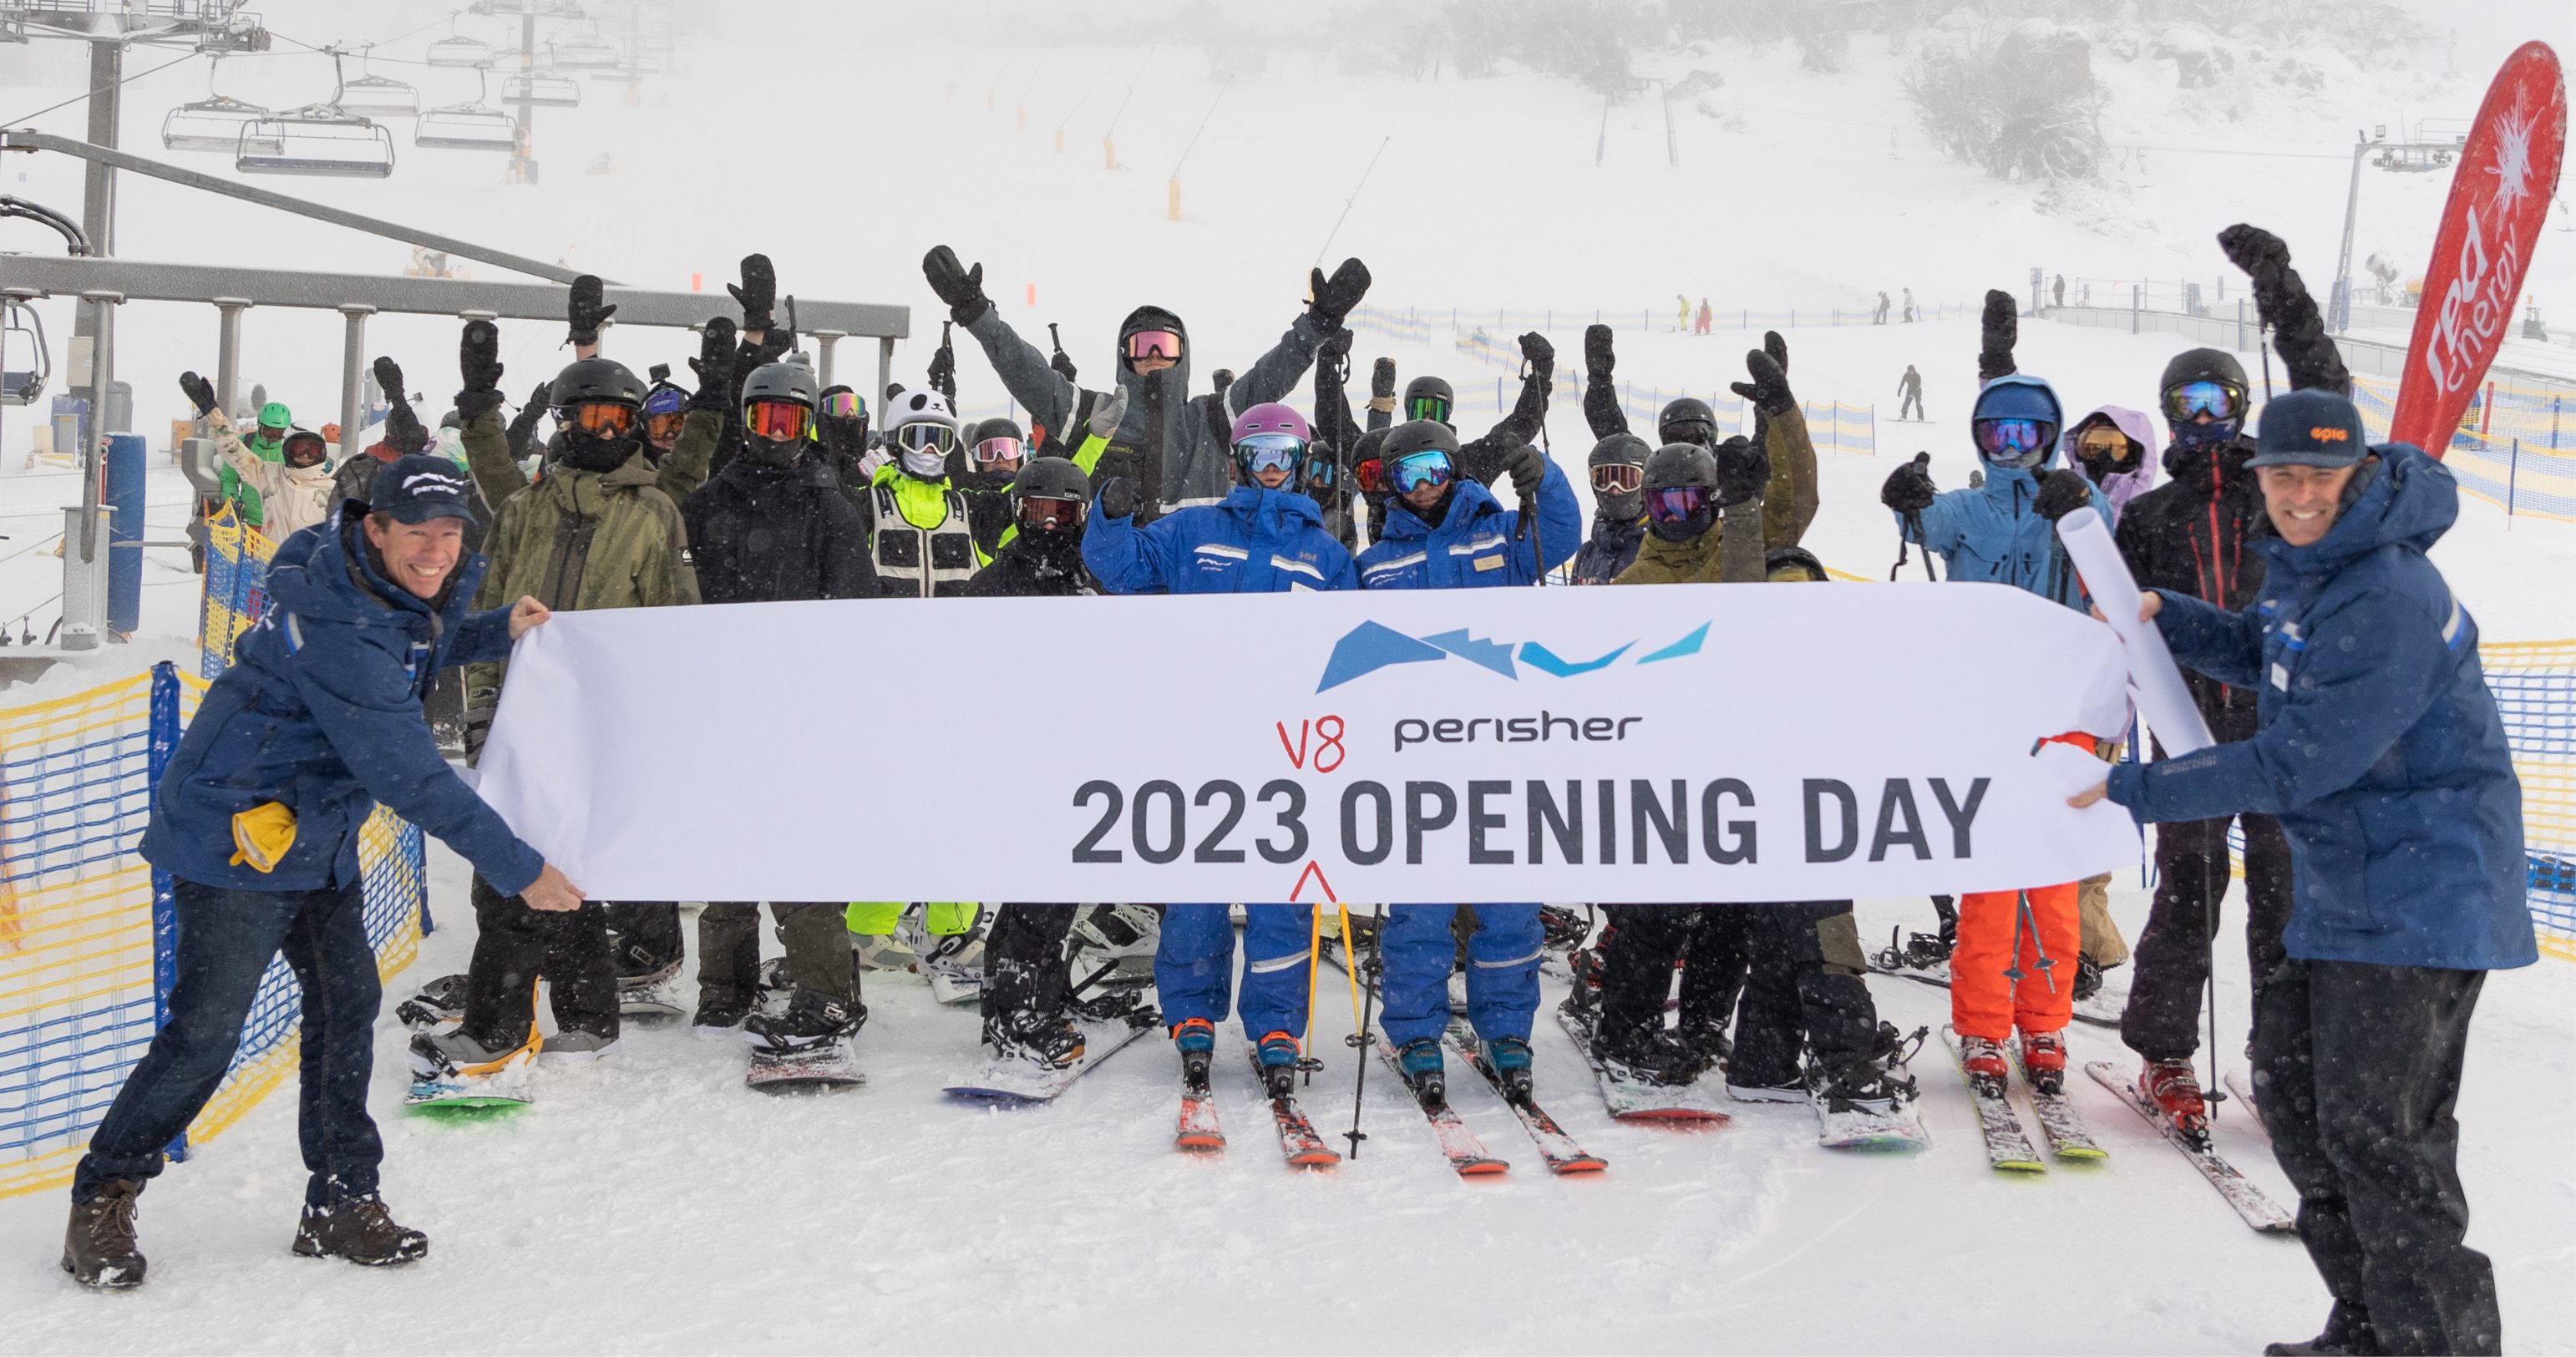 Perisher Opening V8 with Banner 2023